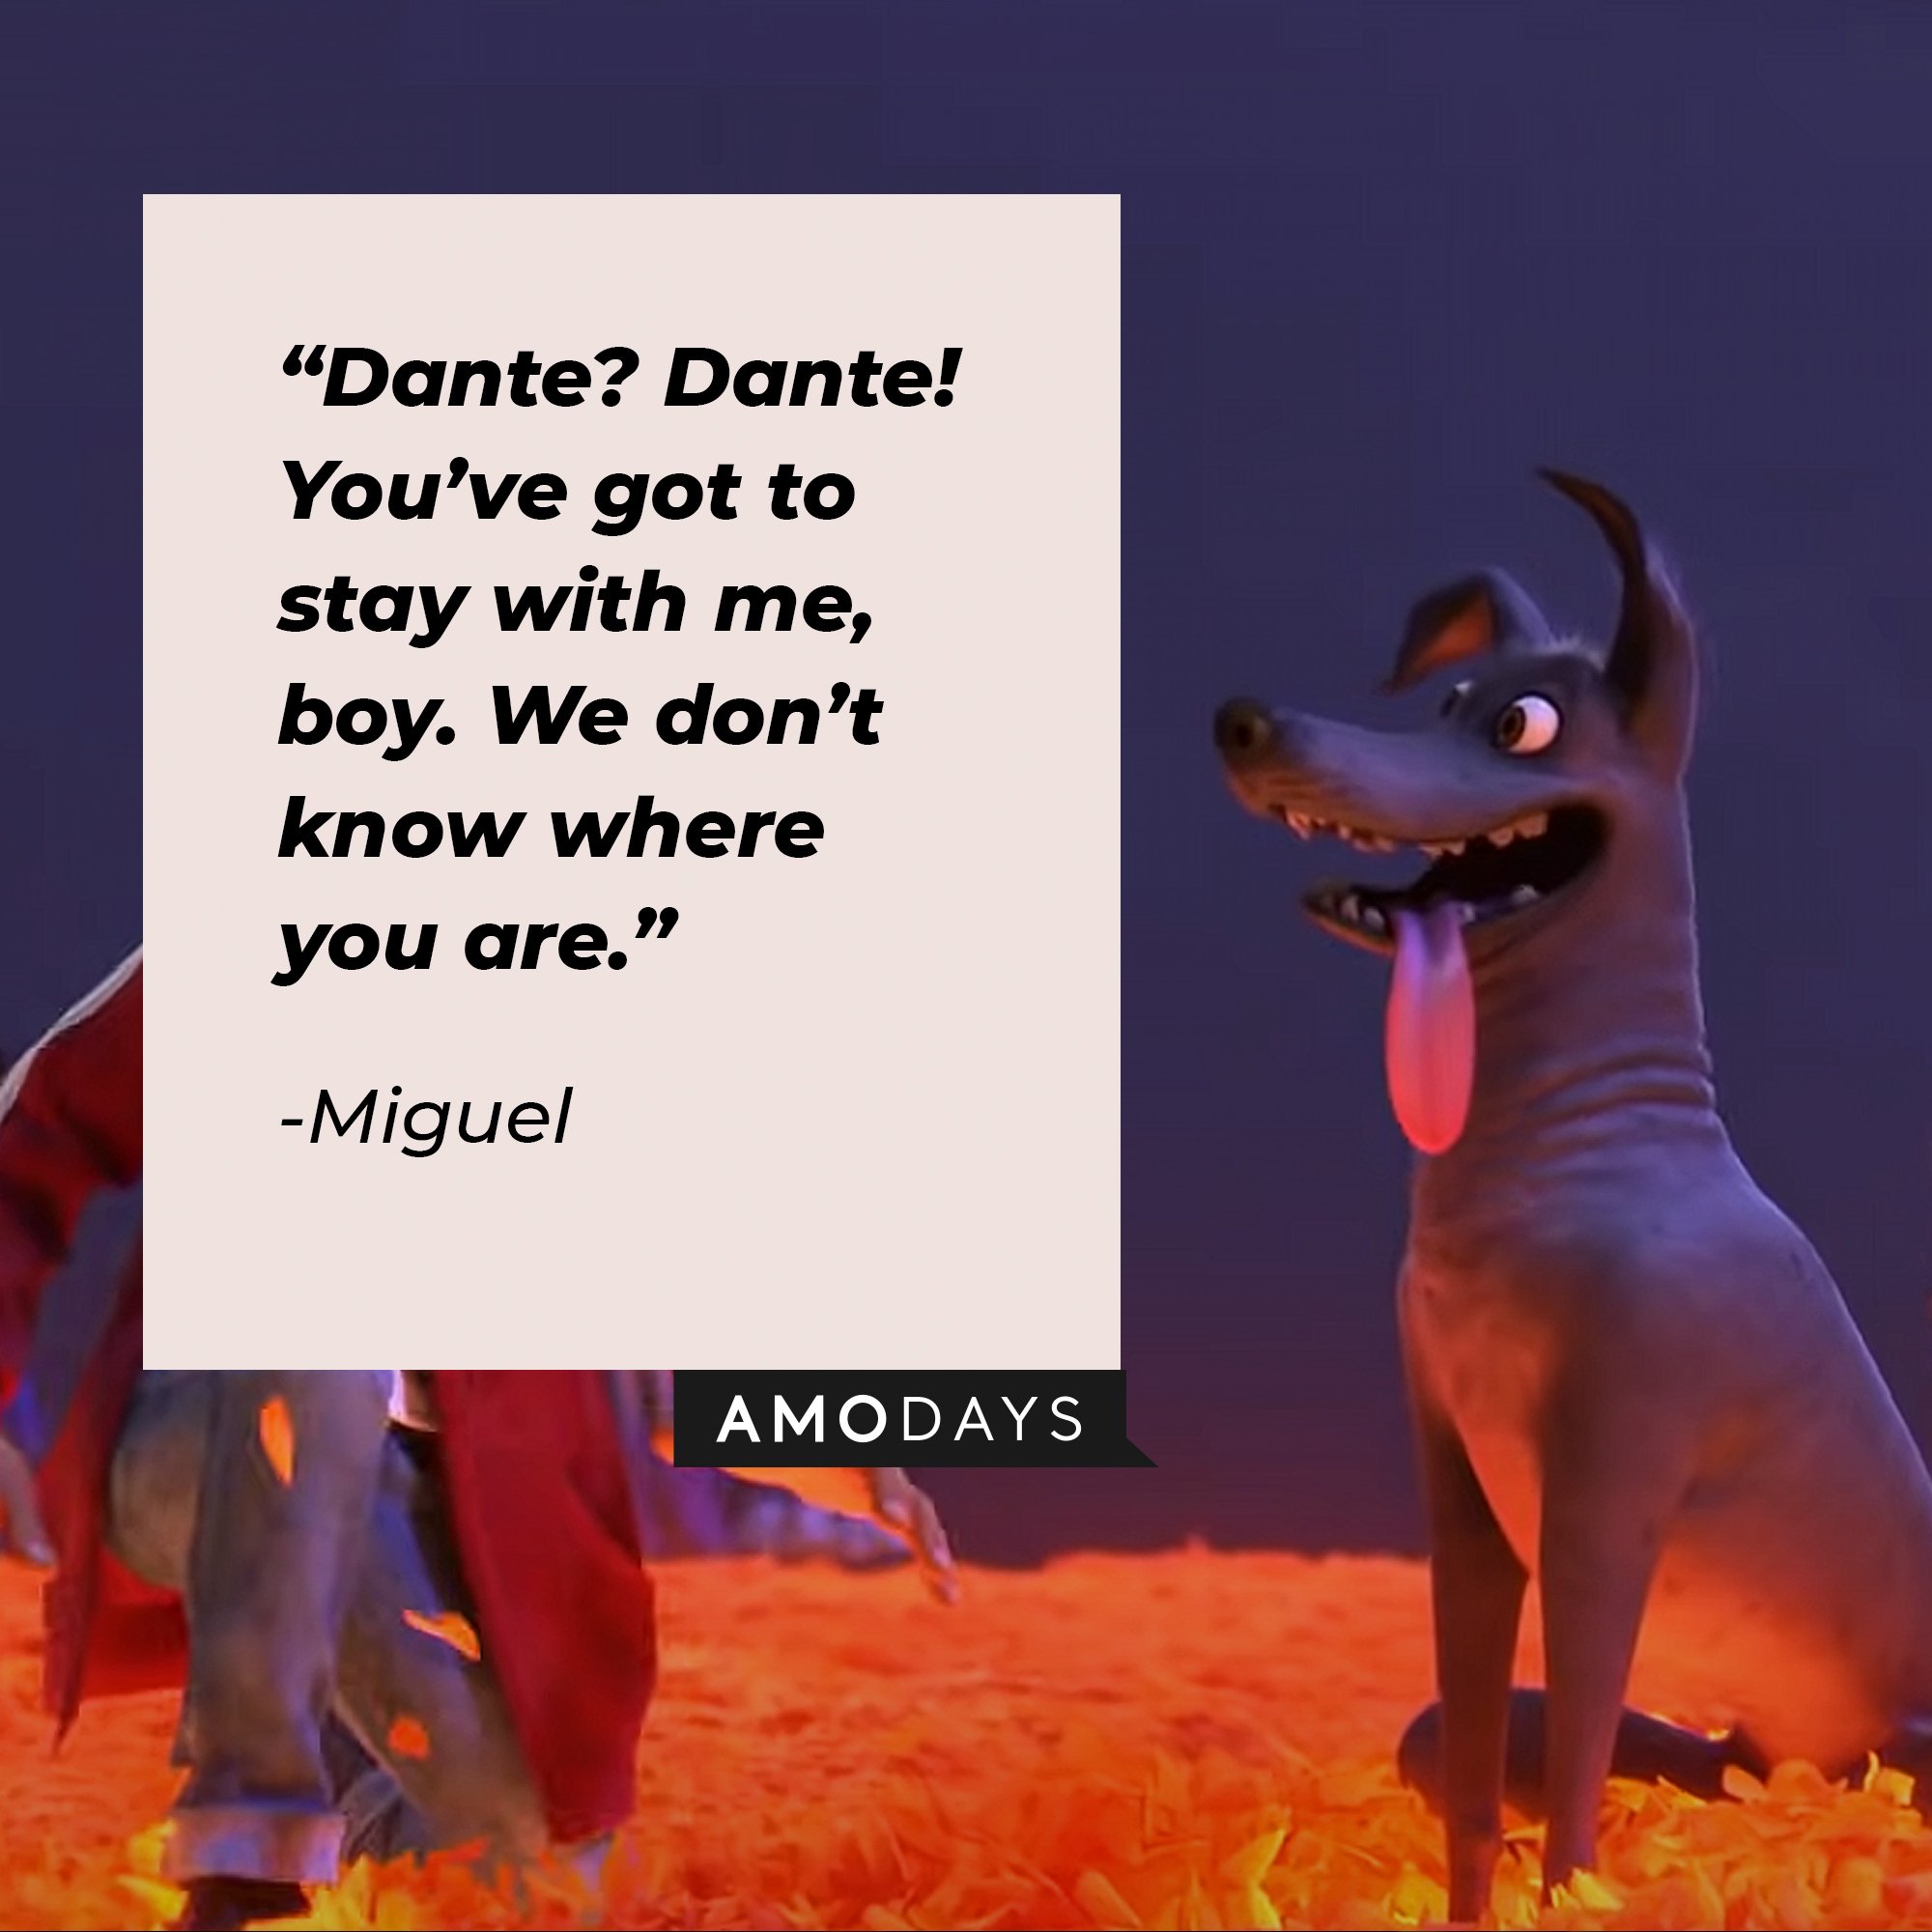   Miguel's quote: “Dante? Dante! You’ve got to stay with me, boy. We don’t know where you are.” | Image: AmoDays